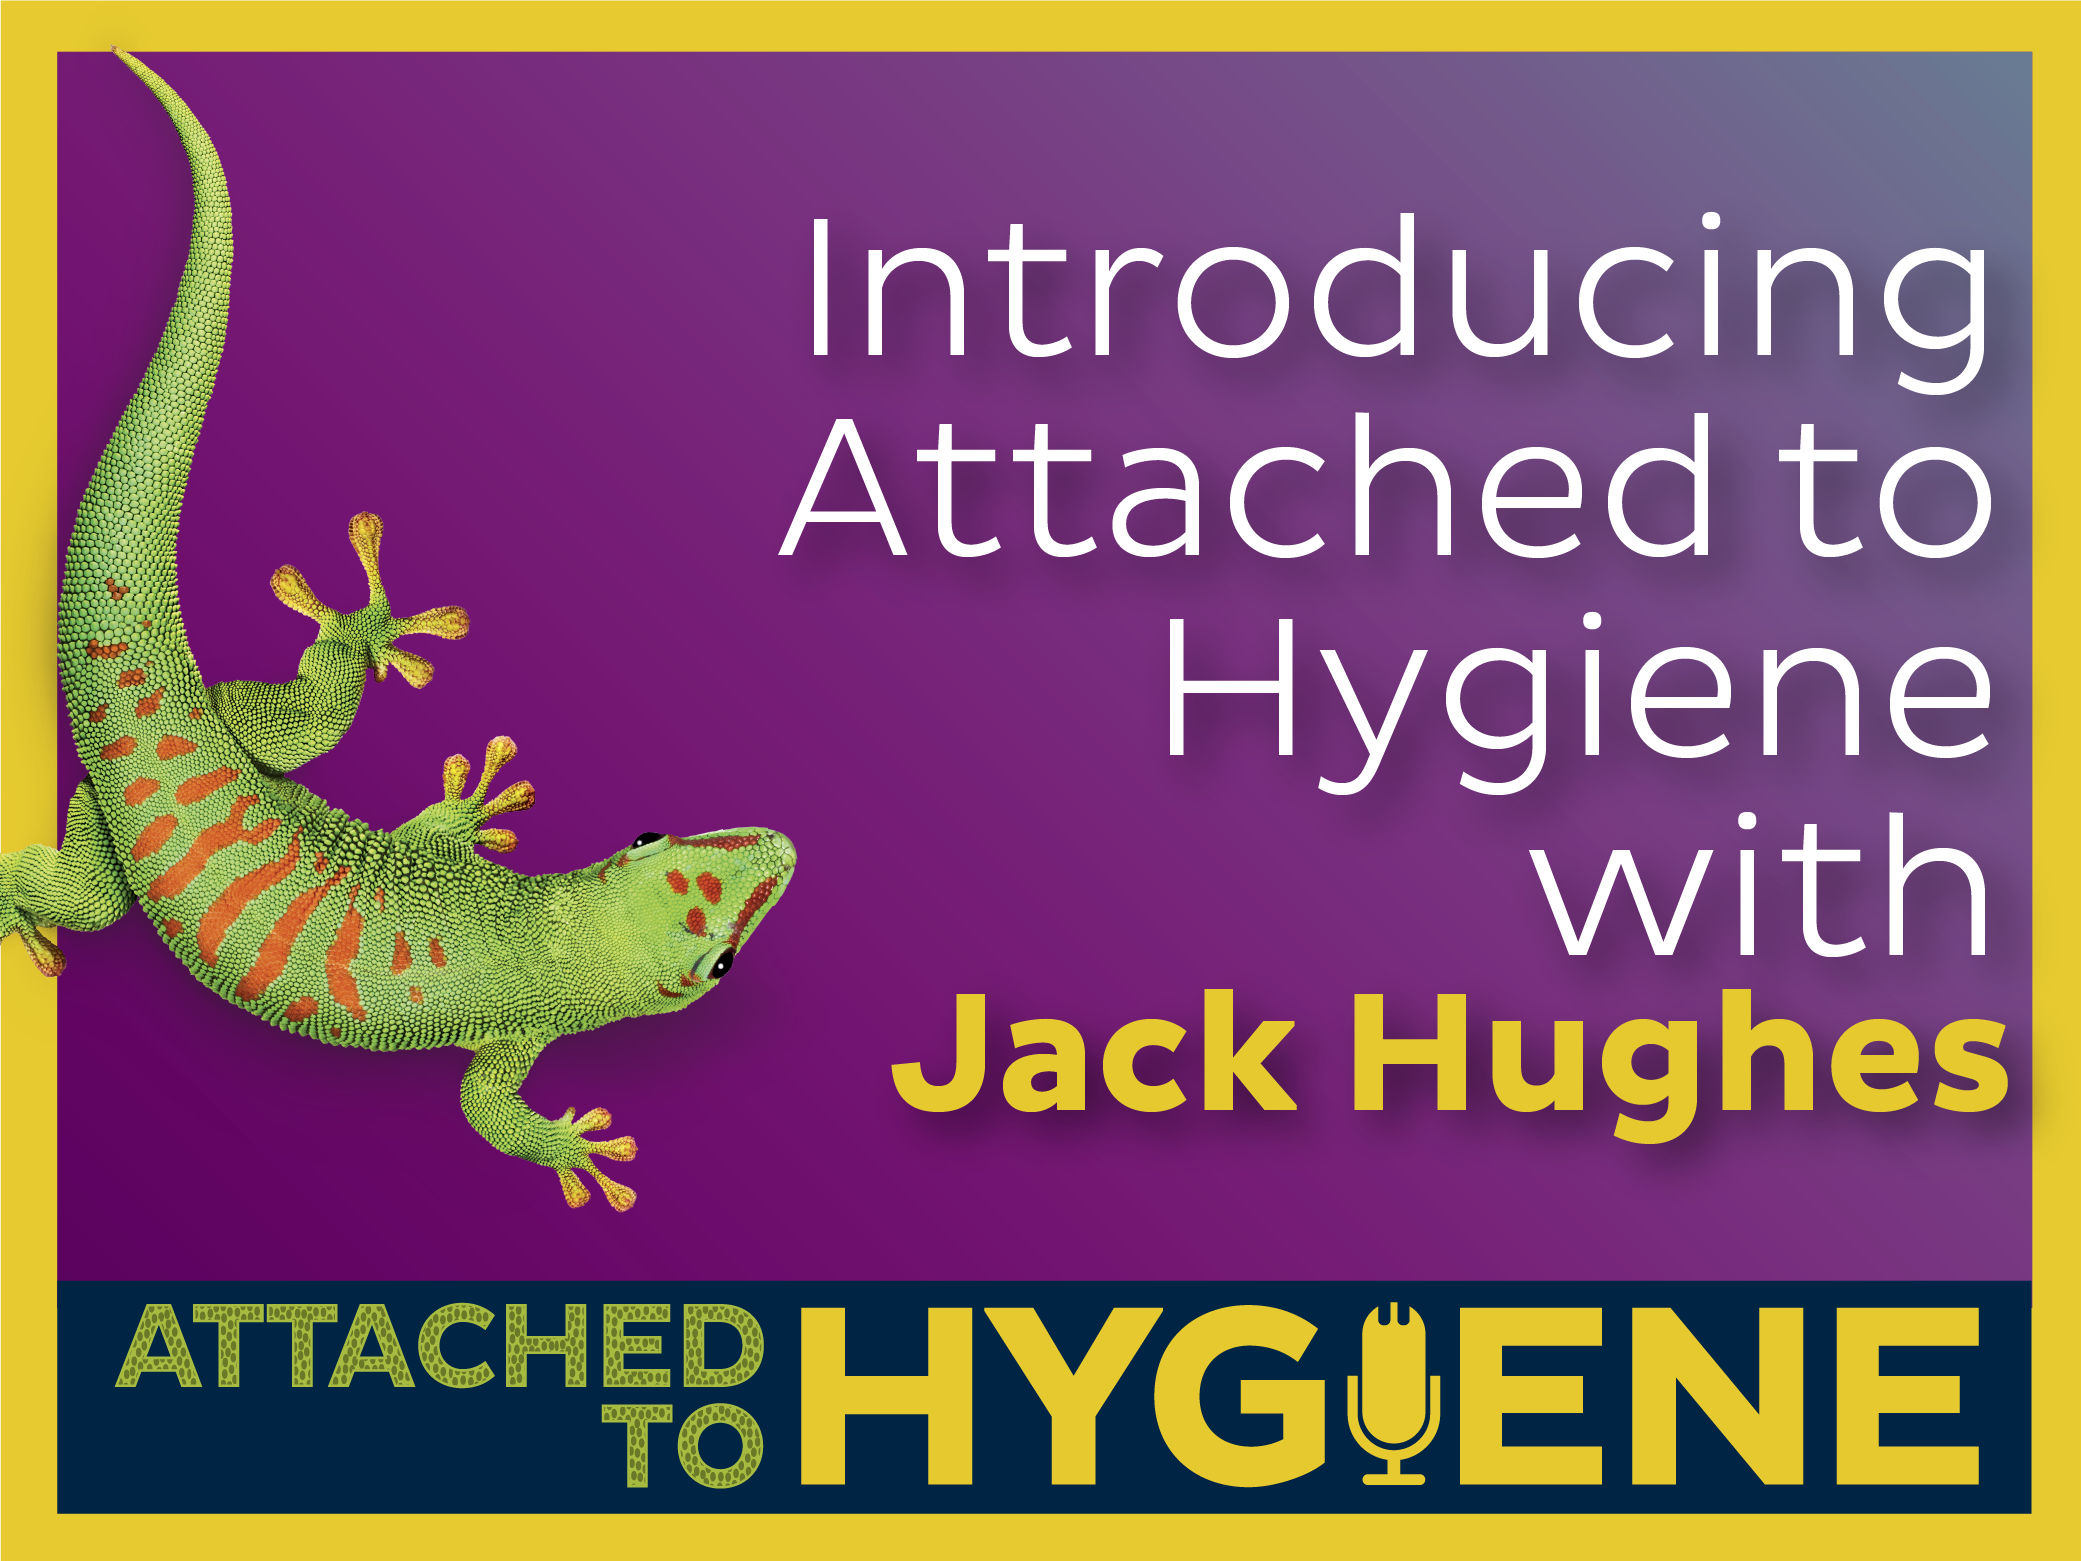 Introducing-Attached-to-Hygiene-with-Jack-Hughes